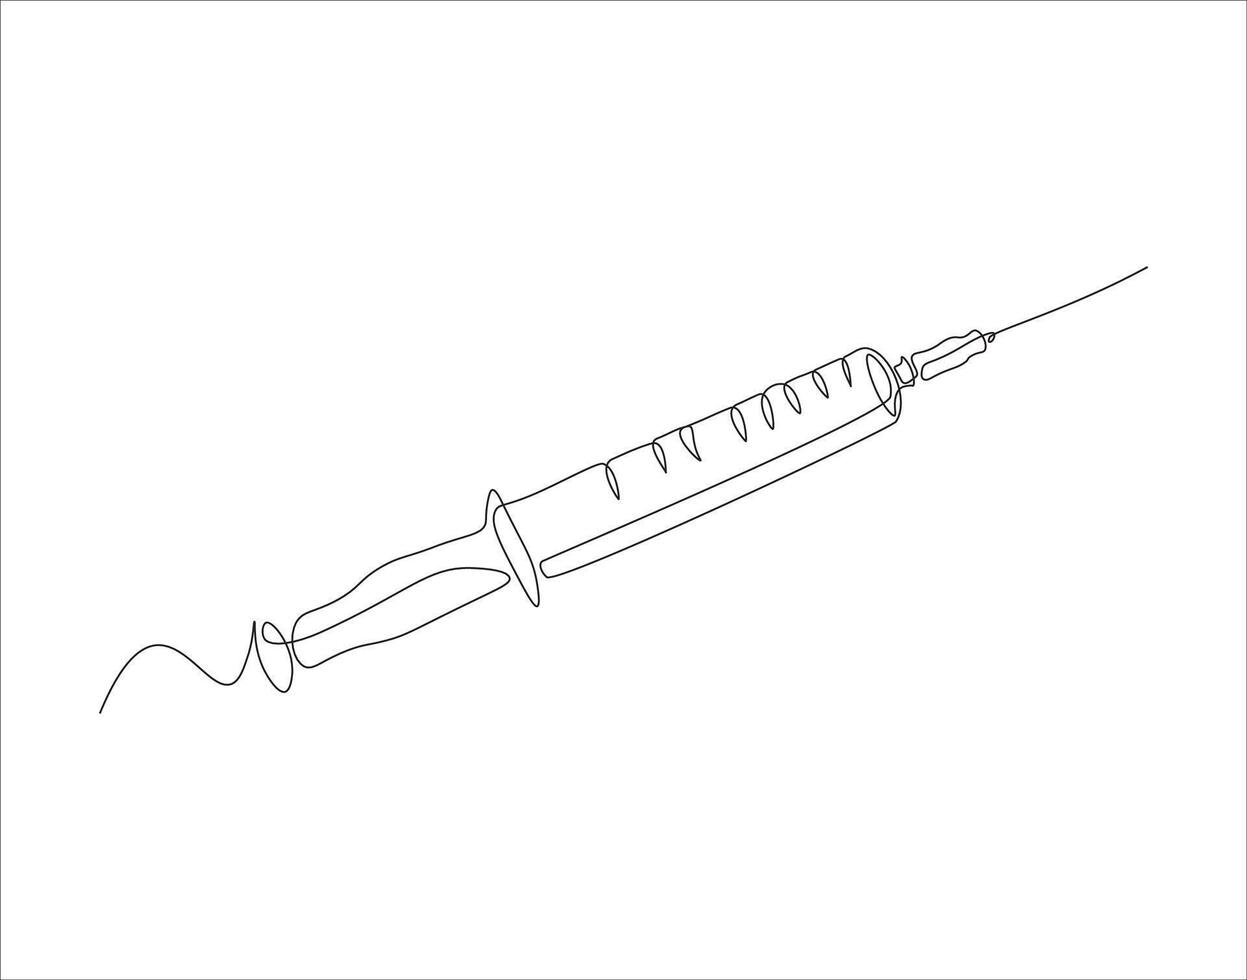 Continuous Line Drawing Of Syringe For Injections. One Line Of Syringe. Inject Continuous Line Art. Editable Outline. vector